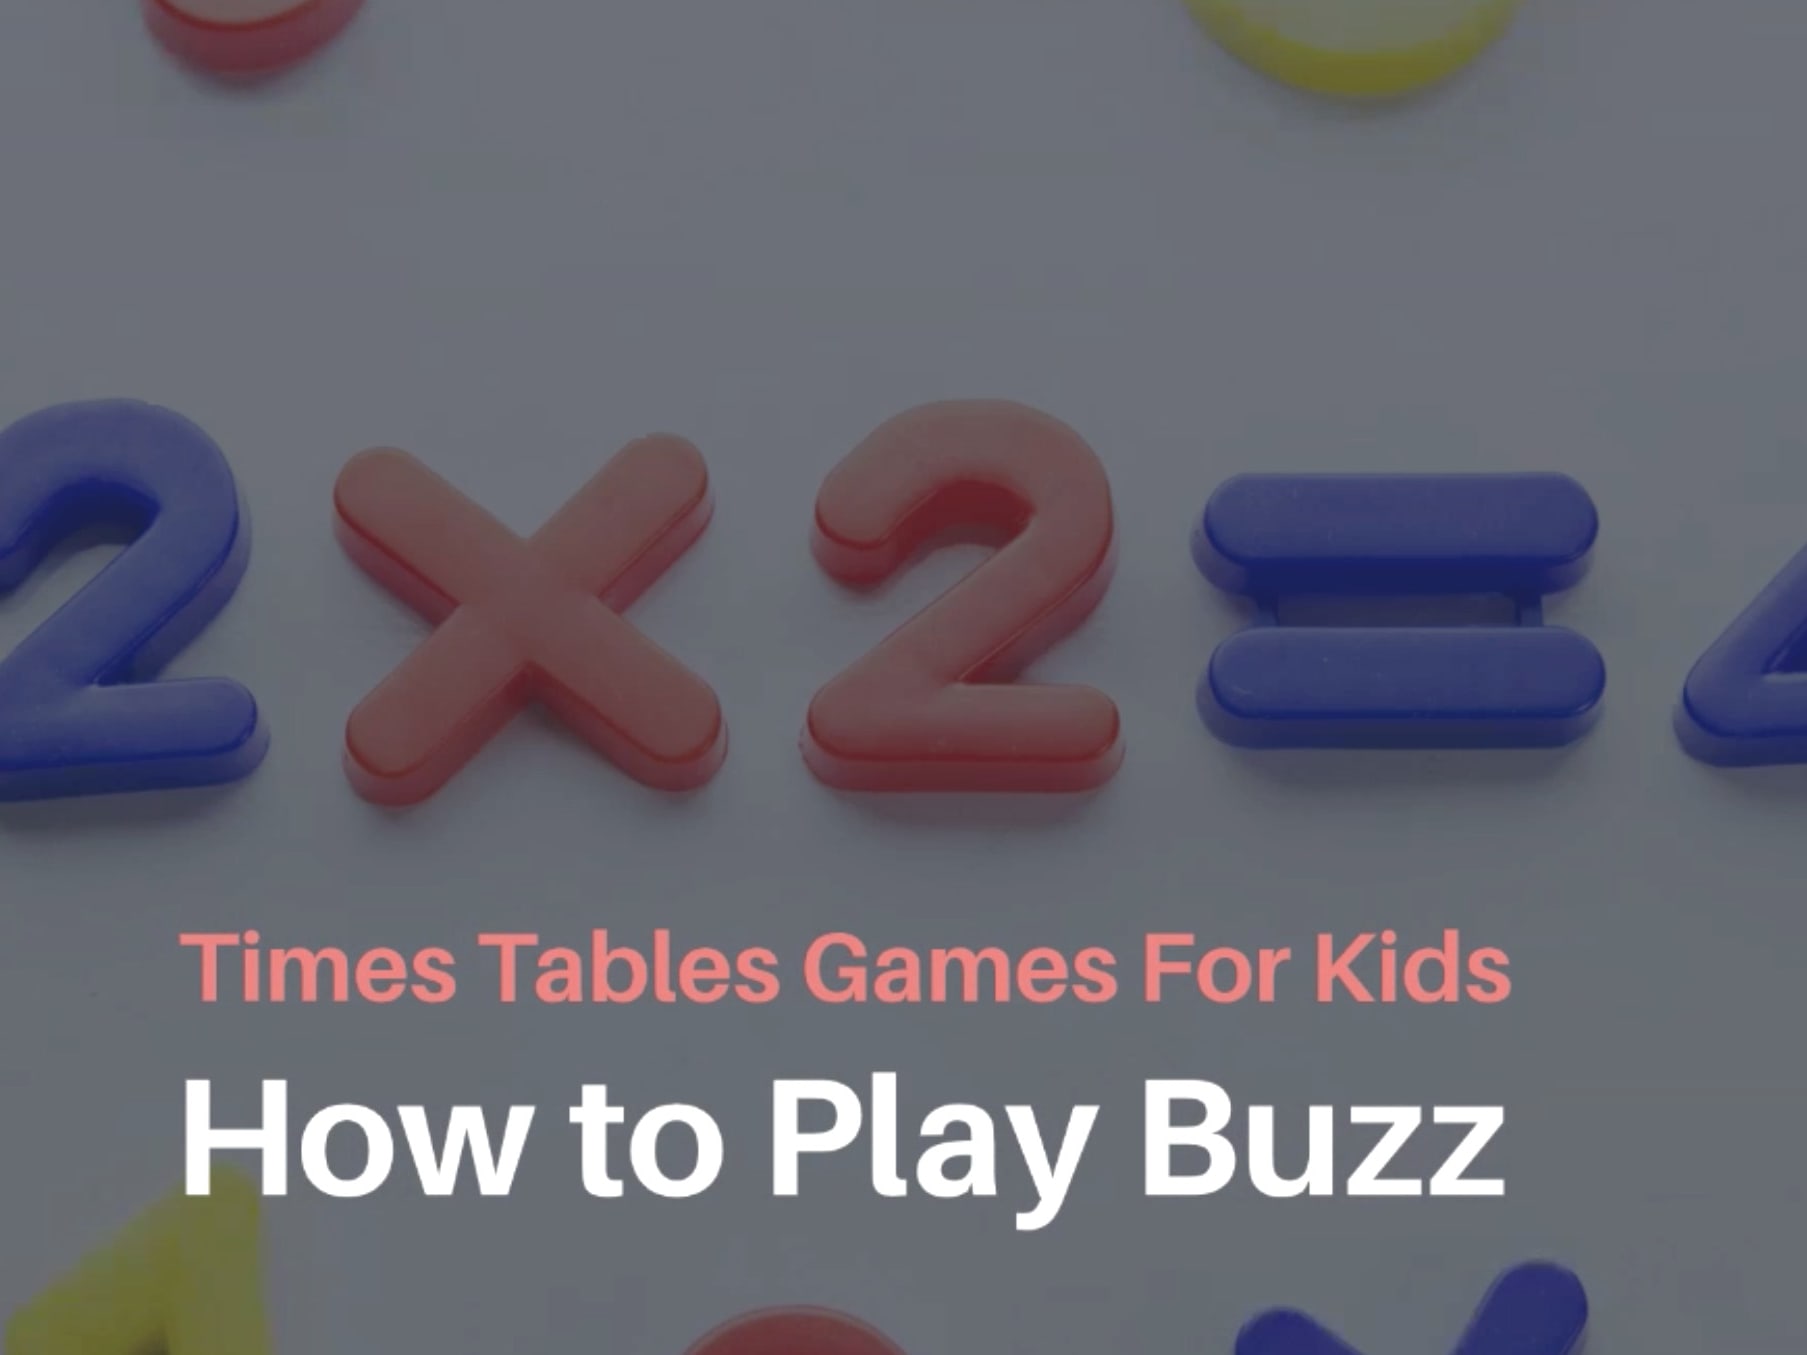 21 Fun Math Games with Dice for Kids 8-12 (+ FREE Printable Dice) - That's  So Montessori